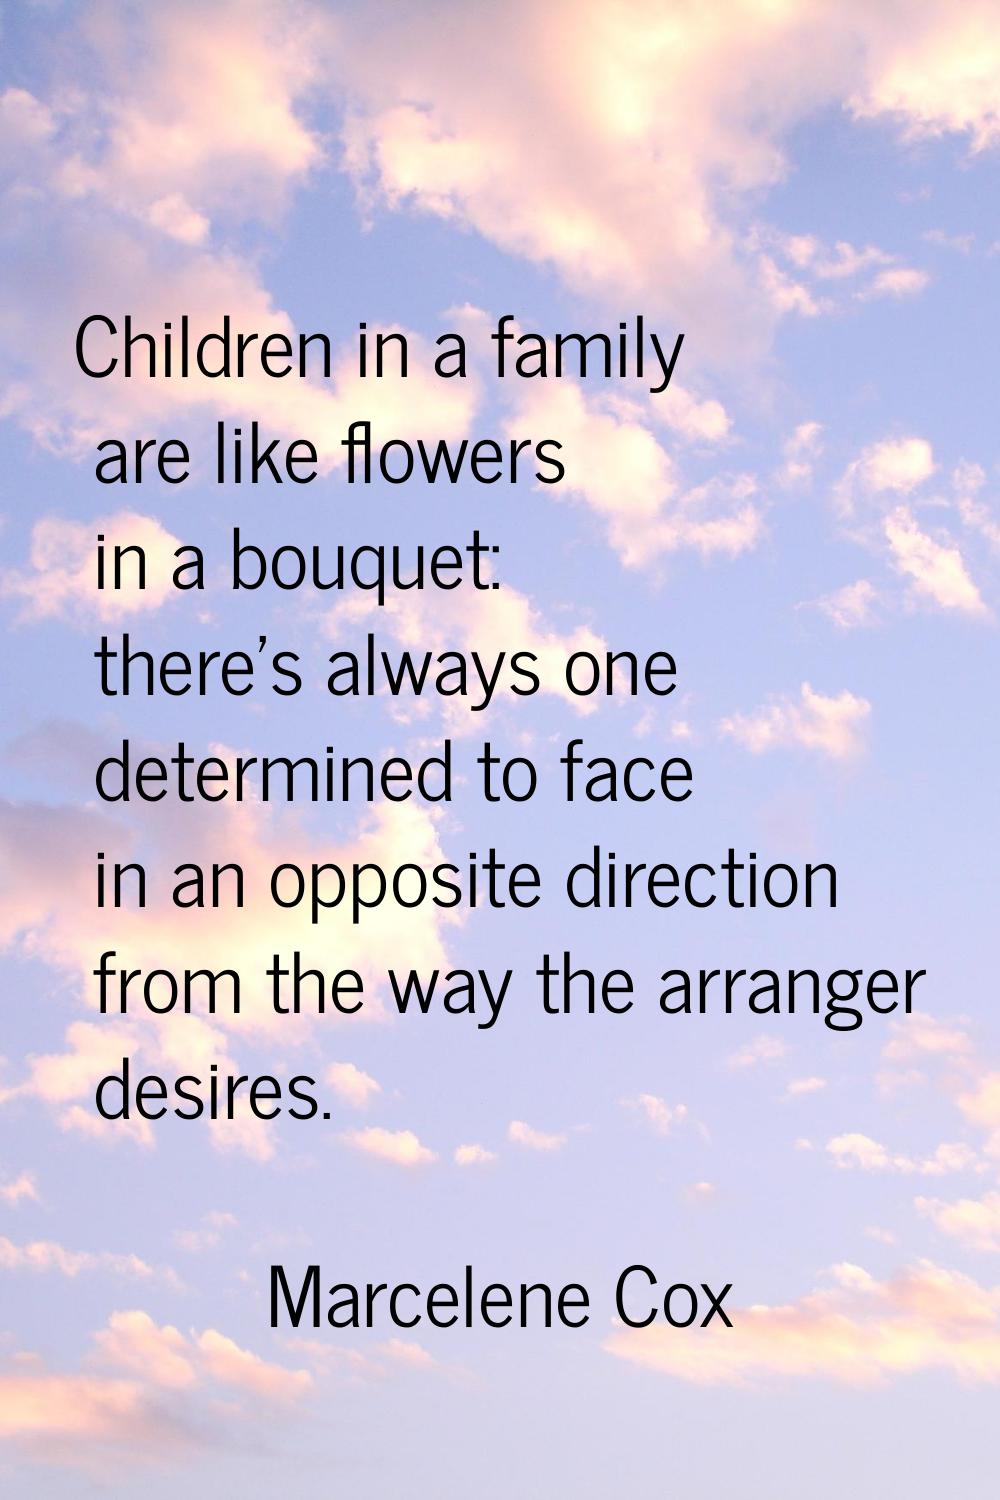 Children in a family are like flowers in a bouquet: there's always one determined to face in an opp